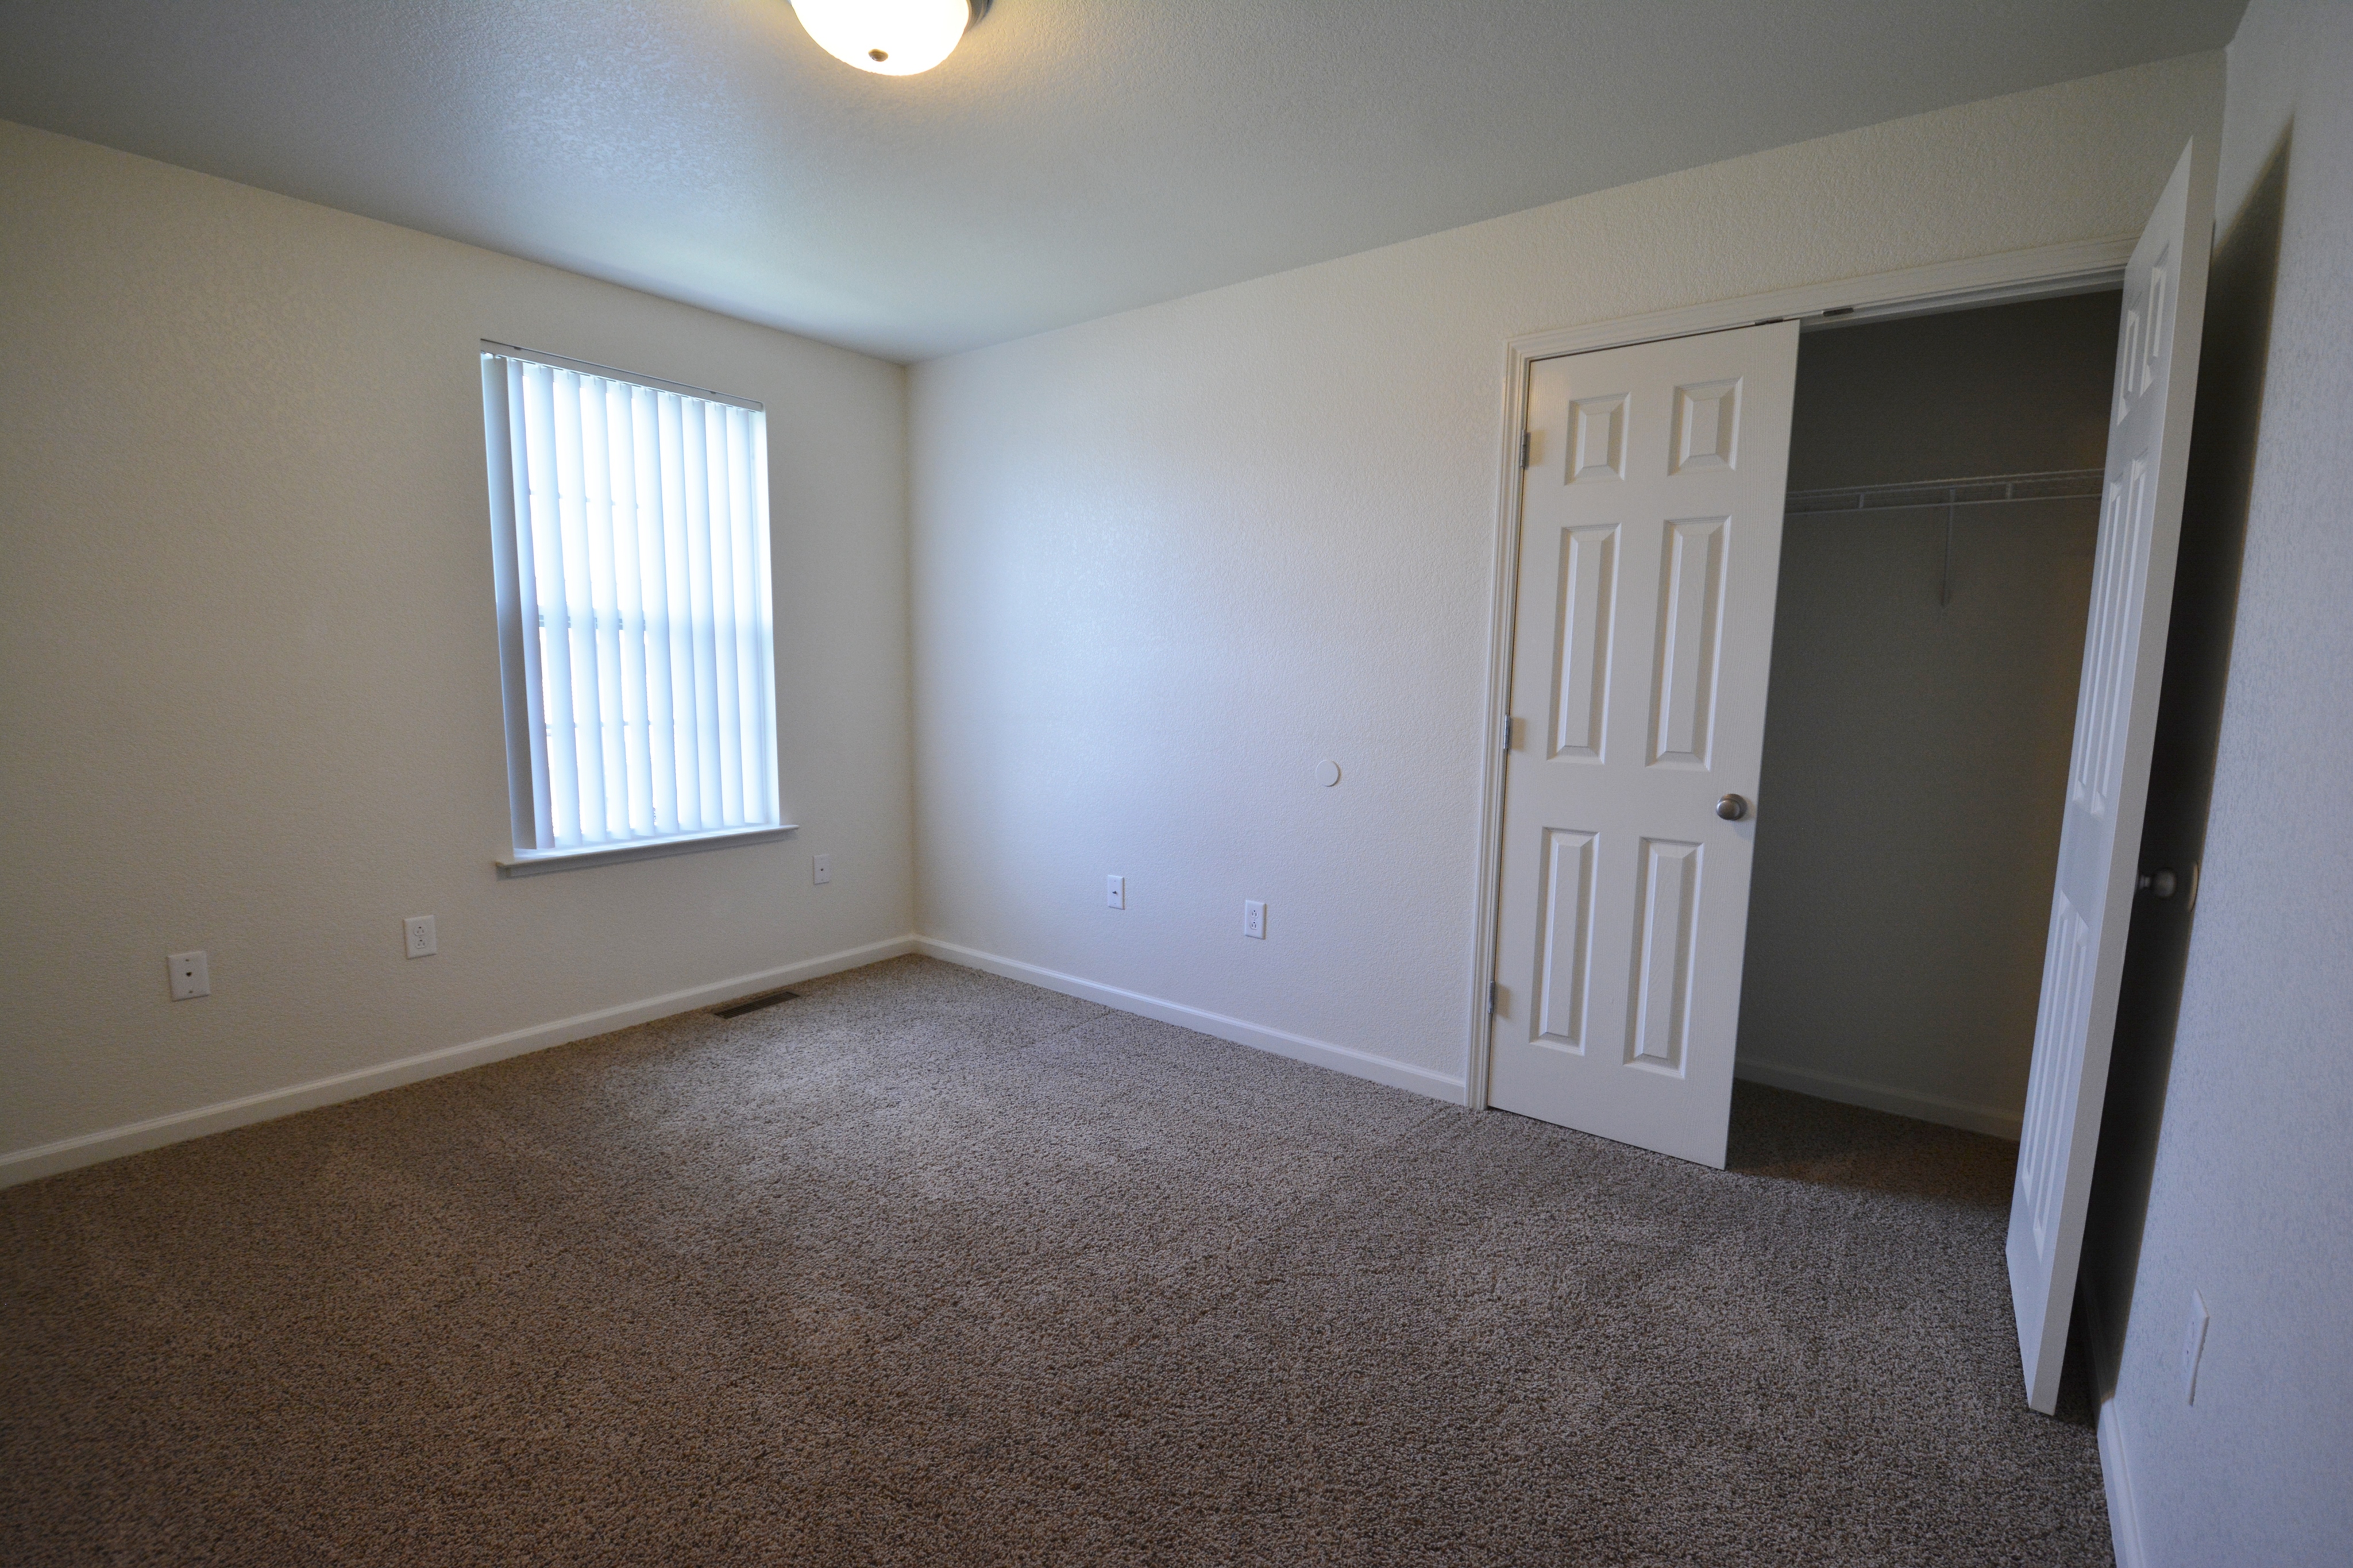 Elegant Bedroom | Fort Campbell KY Apartment For Rent | Campbell Crossing